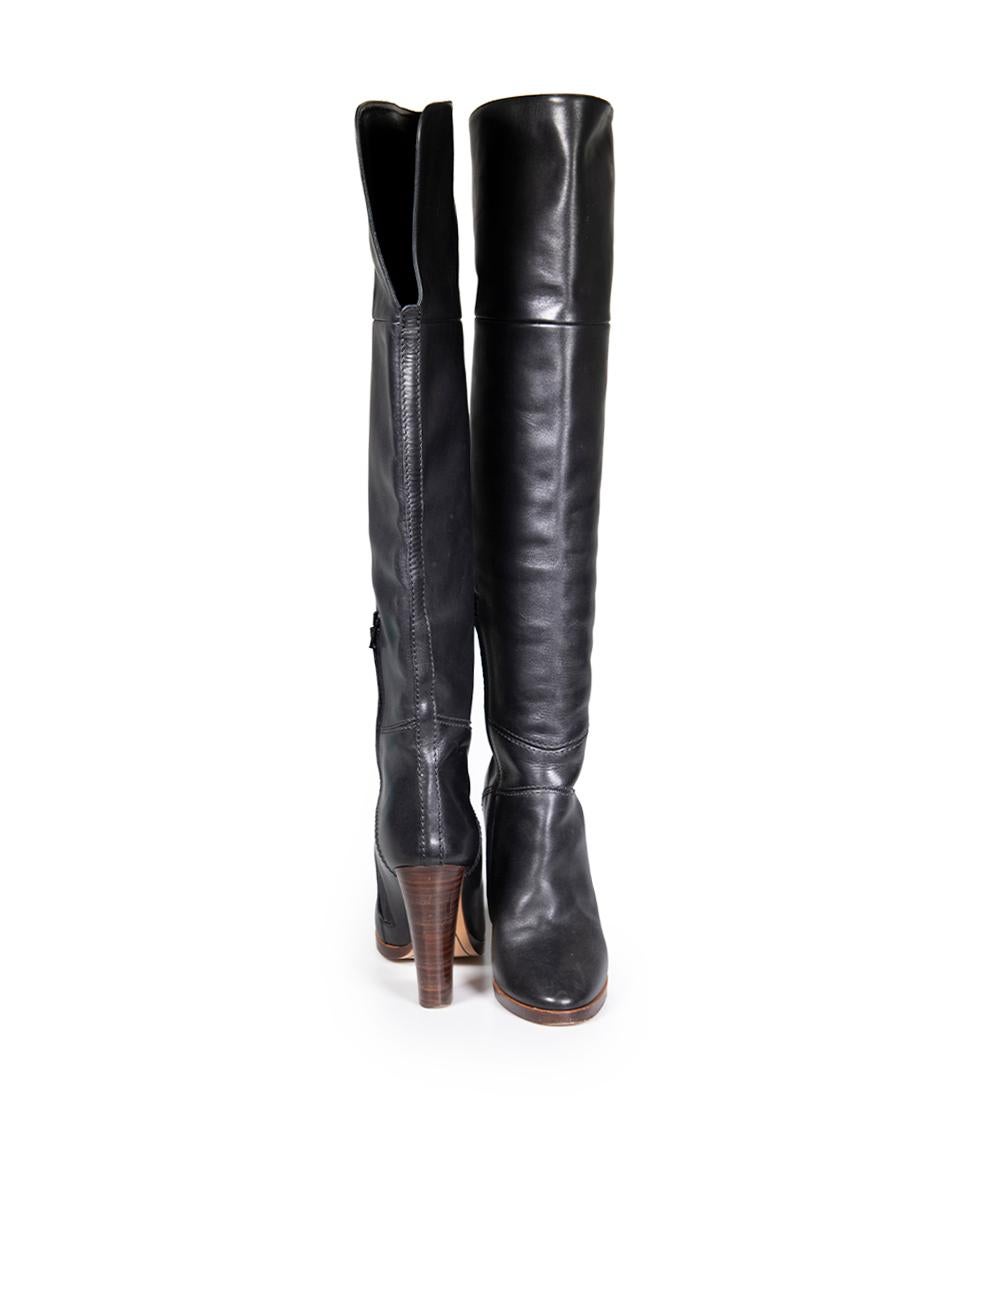 Chloé Black Leather Over-the-Knee Boots Size IT 40 In Good Condition For Sale In London, GB